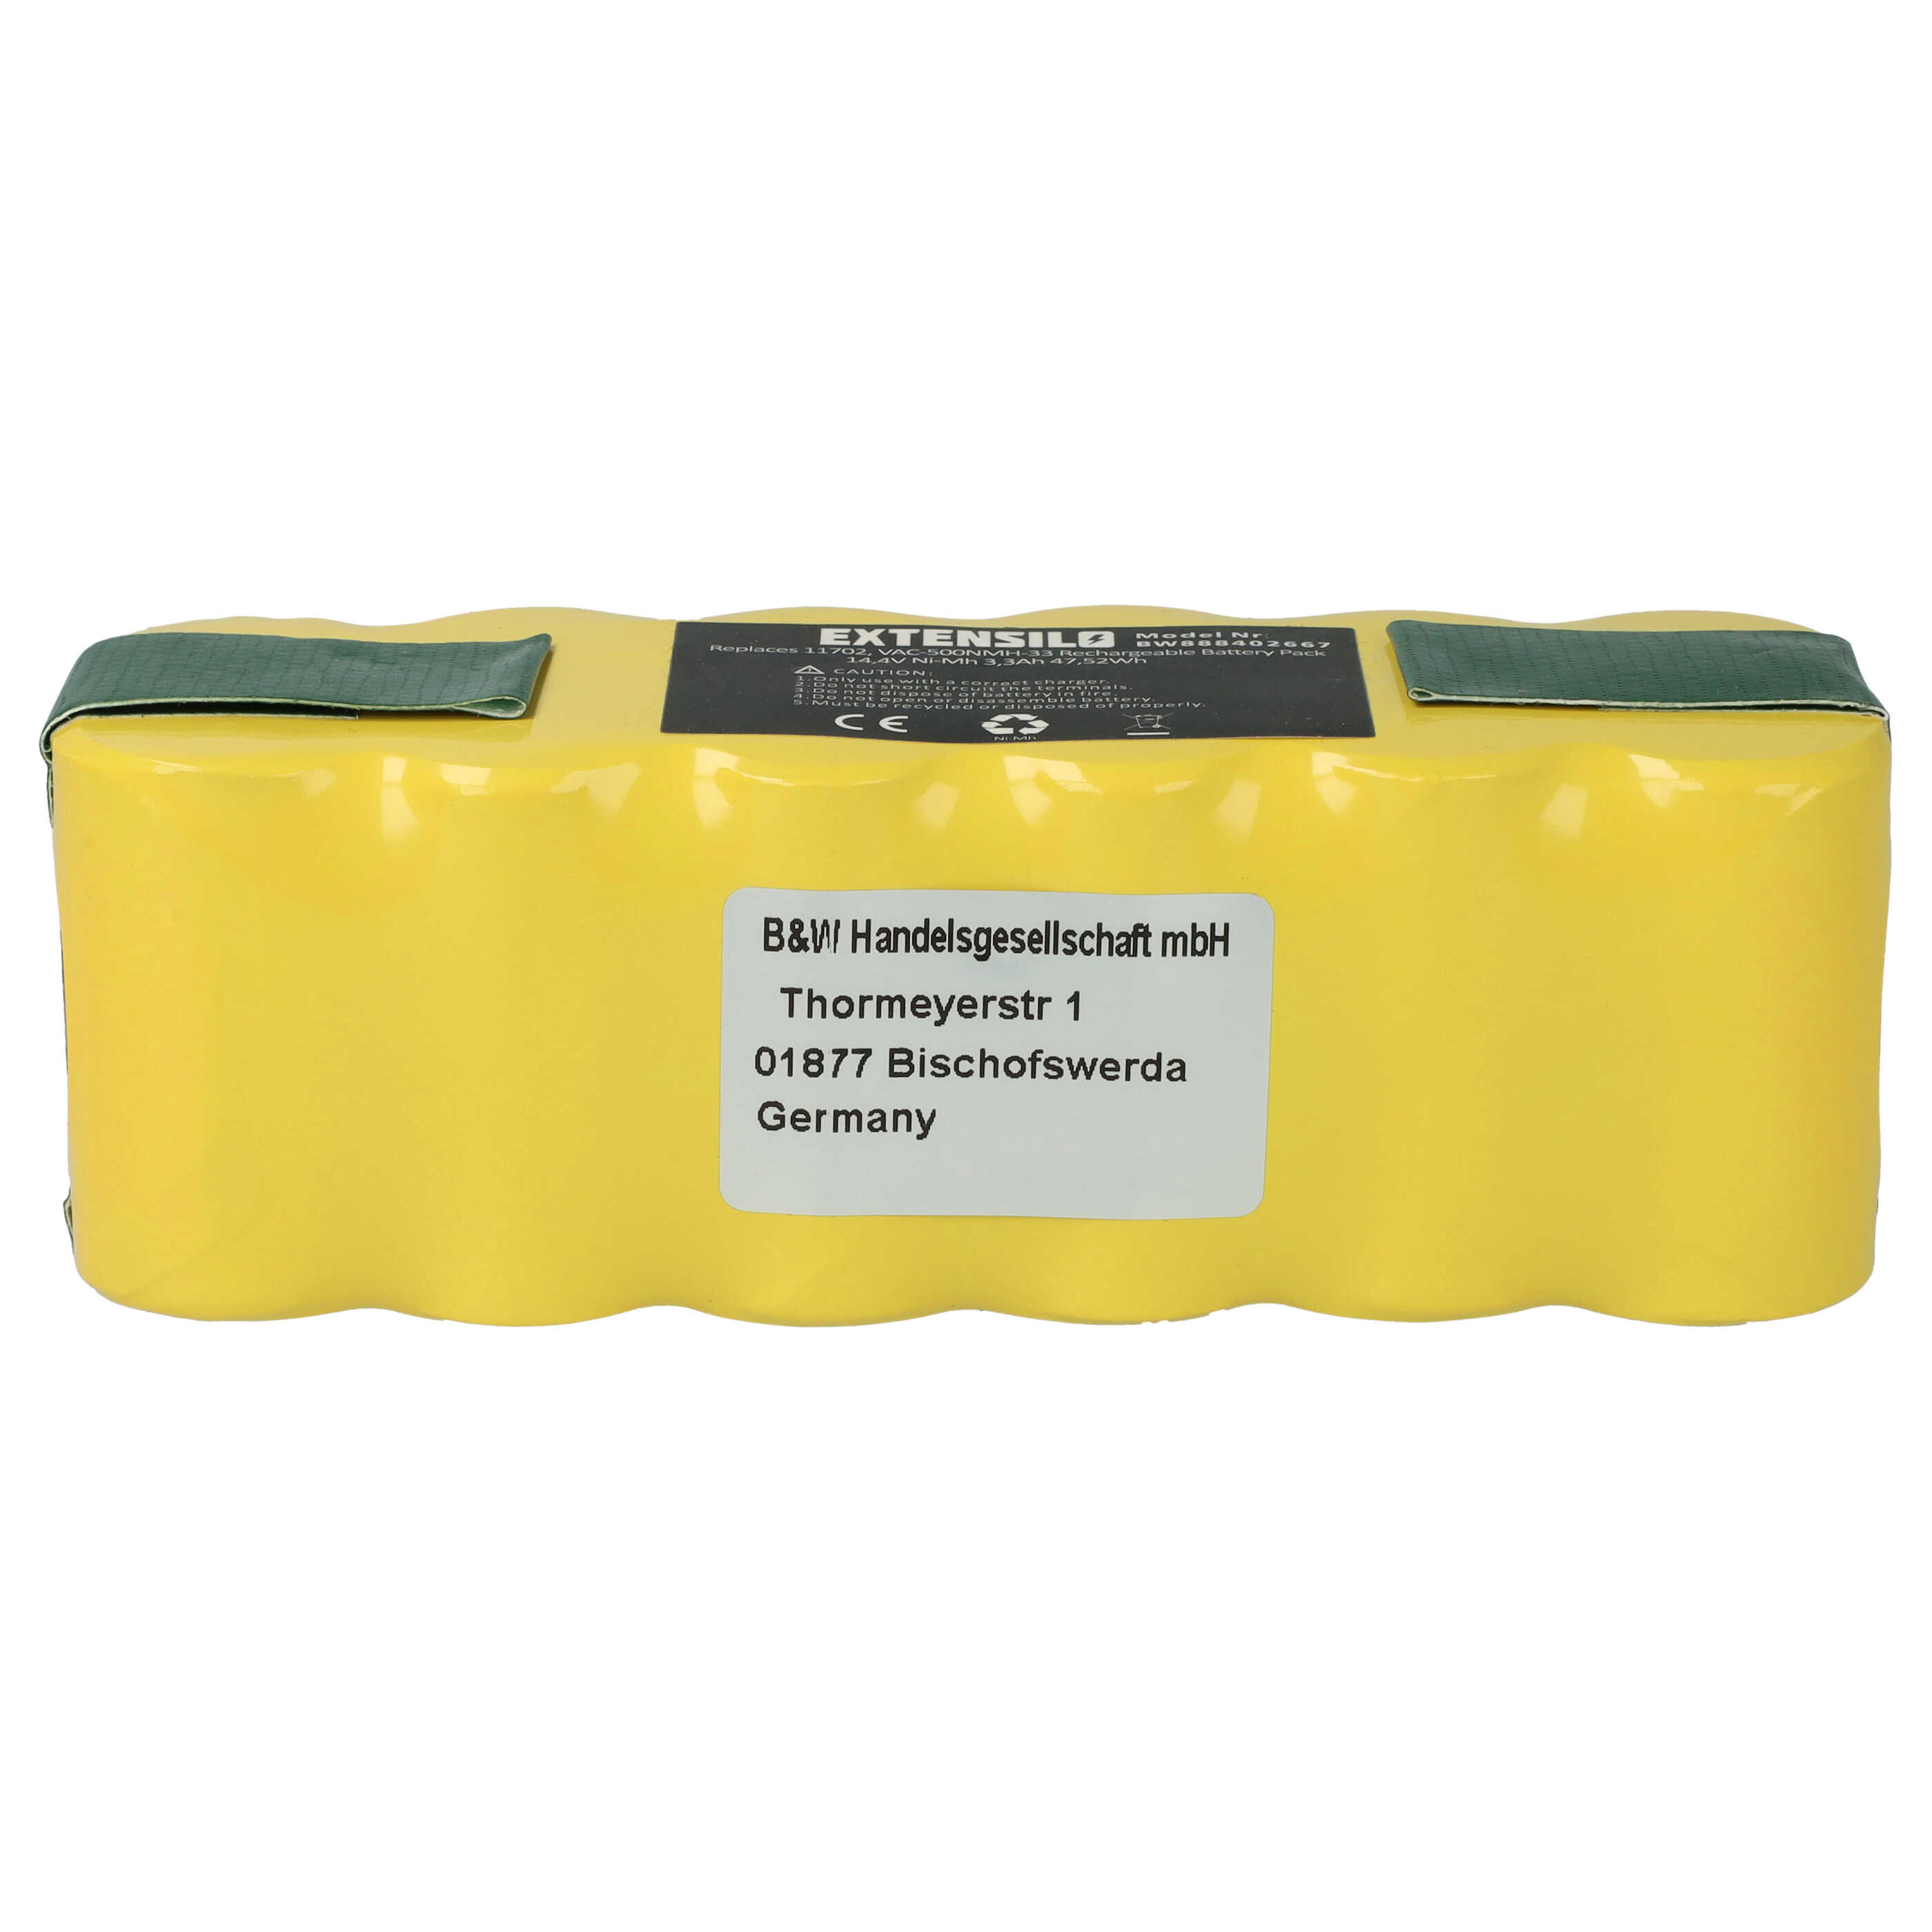 Battery Replacement for 11702, 80501e, 80601, 11702, 68939, 80501, 855714, 4419696 for - 3300mAh, 14.4V, NiMH